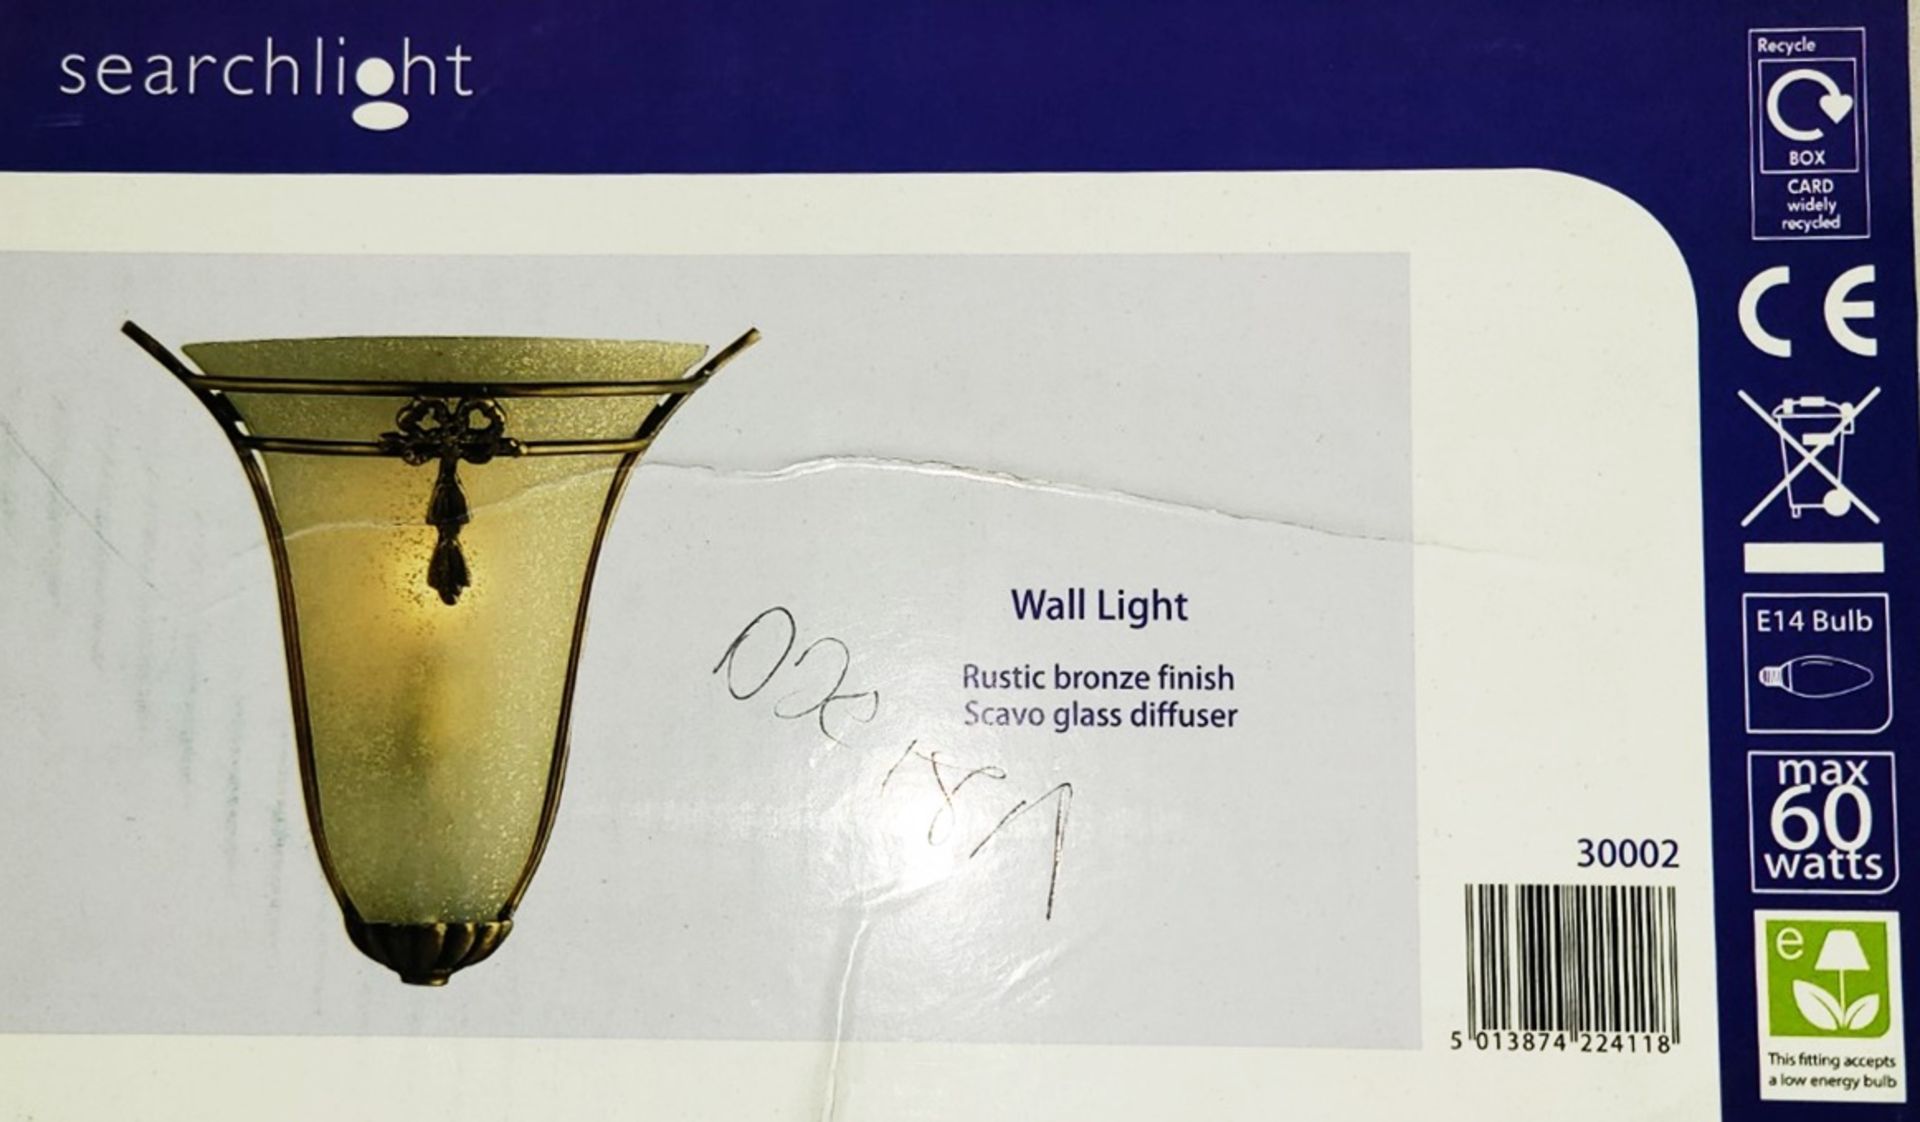 1 x SEARCHLIGHT Single Wall Light Rustic Bronze With A Scavo Glass Diffuser Shade 28cm